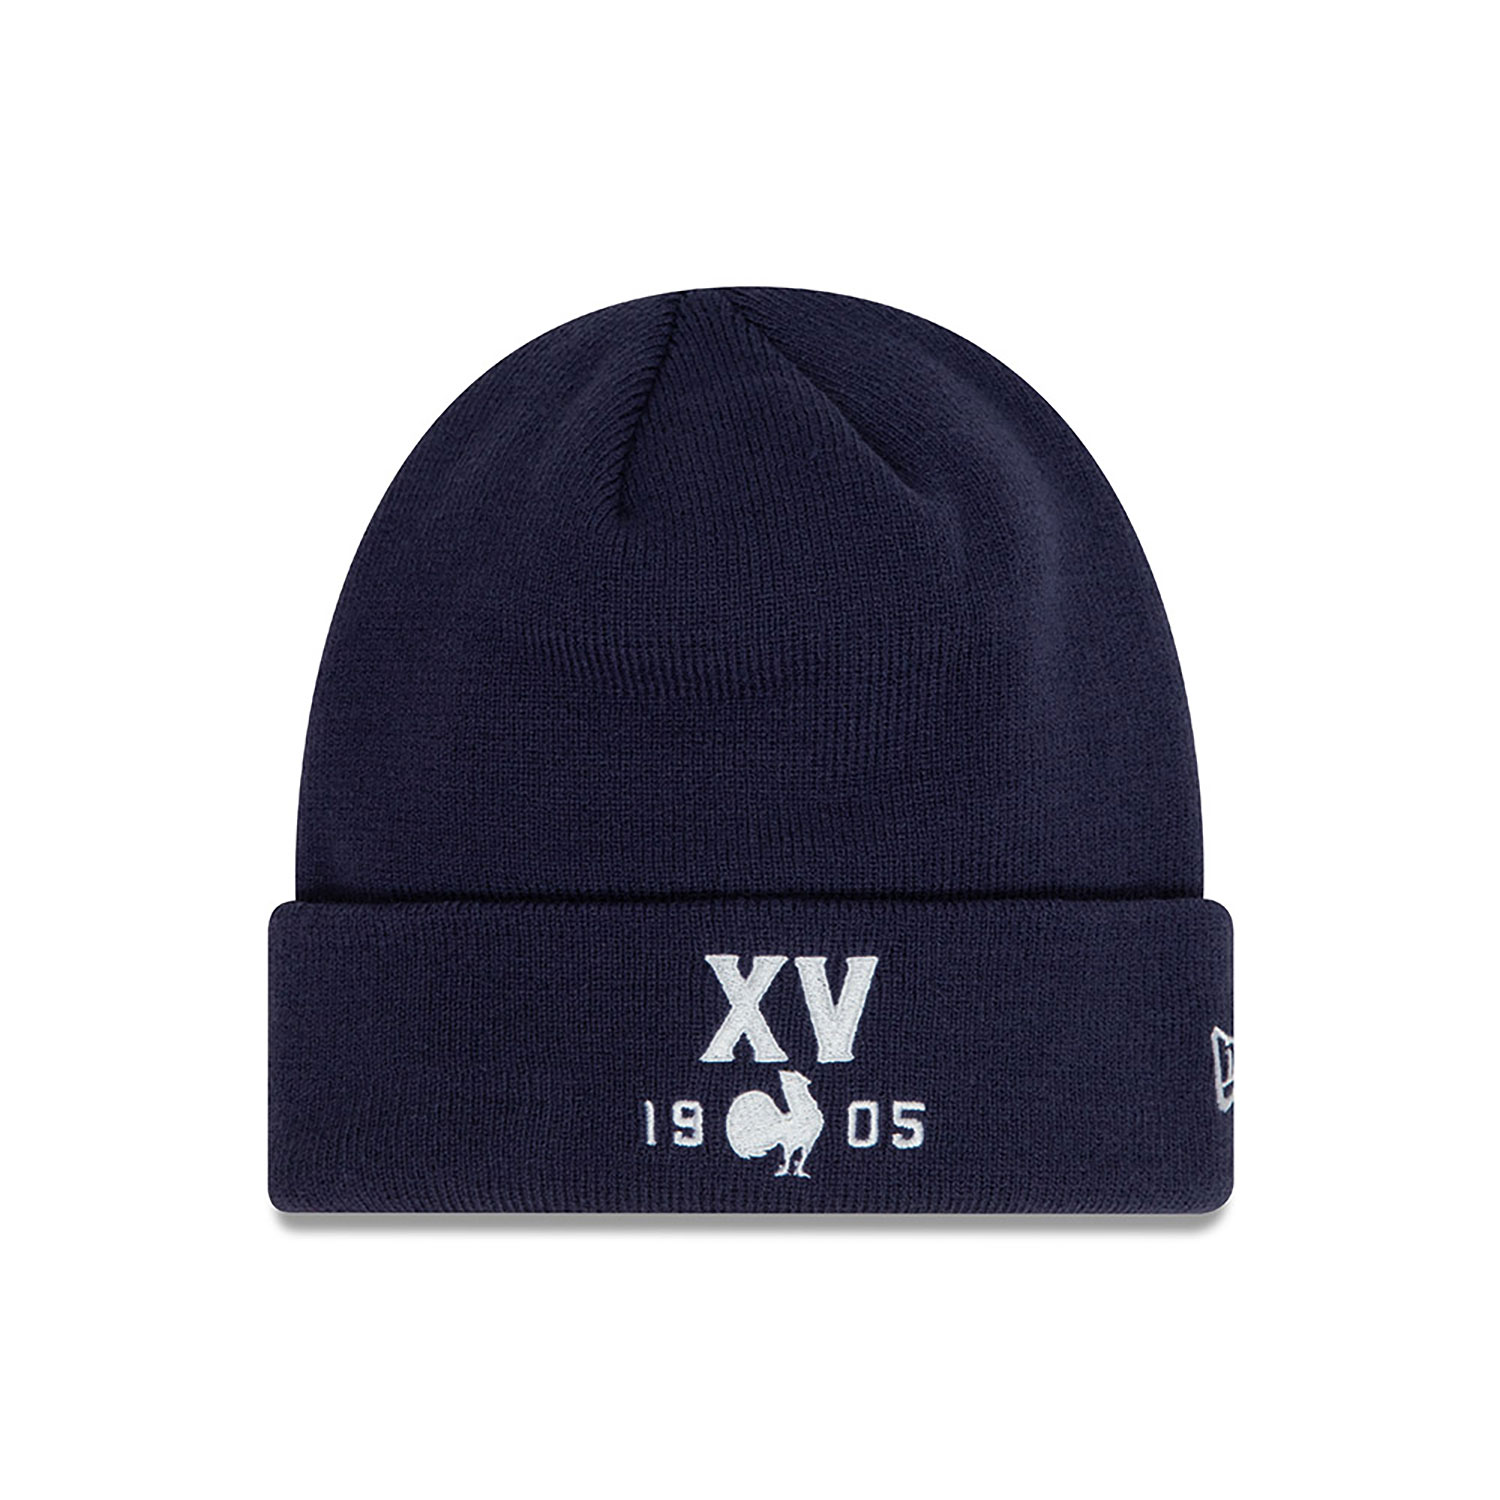 French Federation Of Rugby Heritage Navy Cuff Knit Beanie Hat